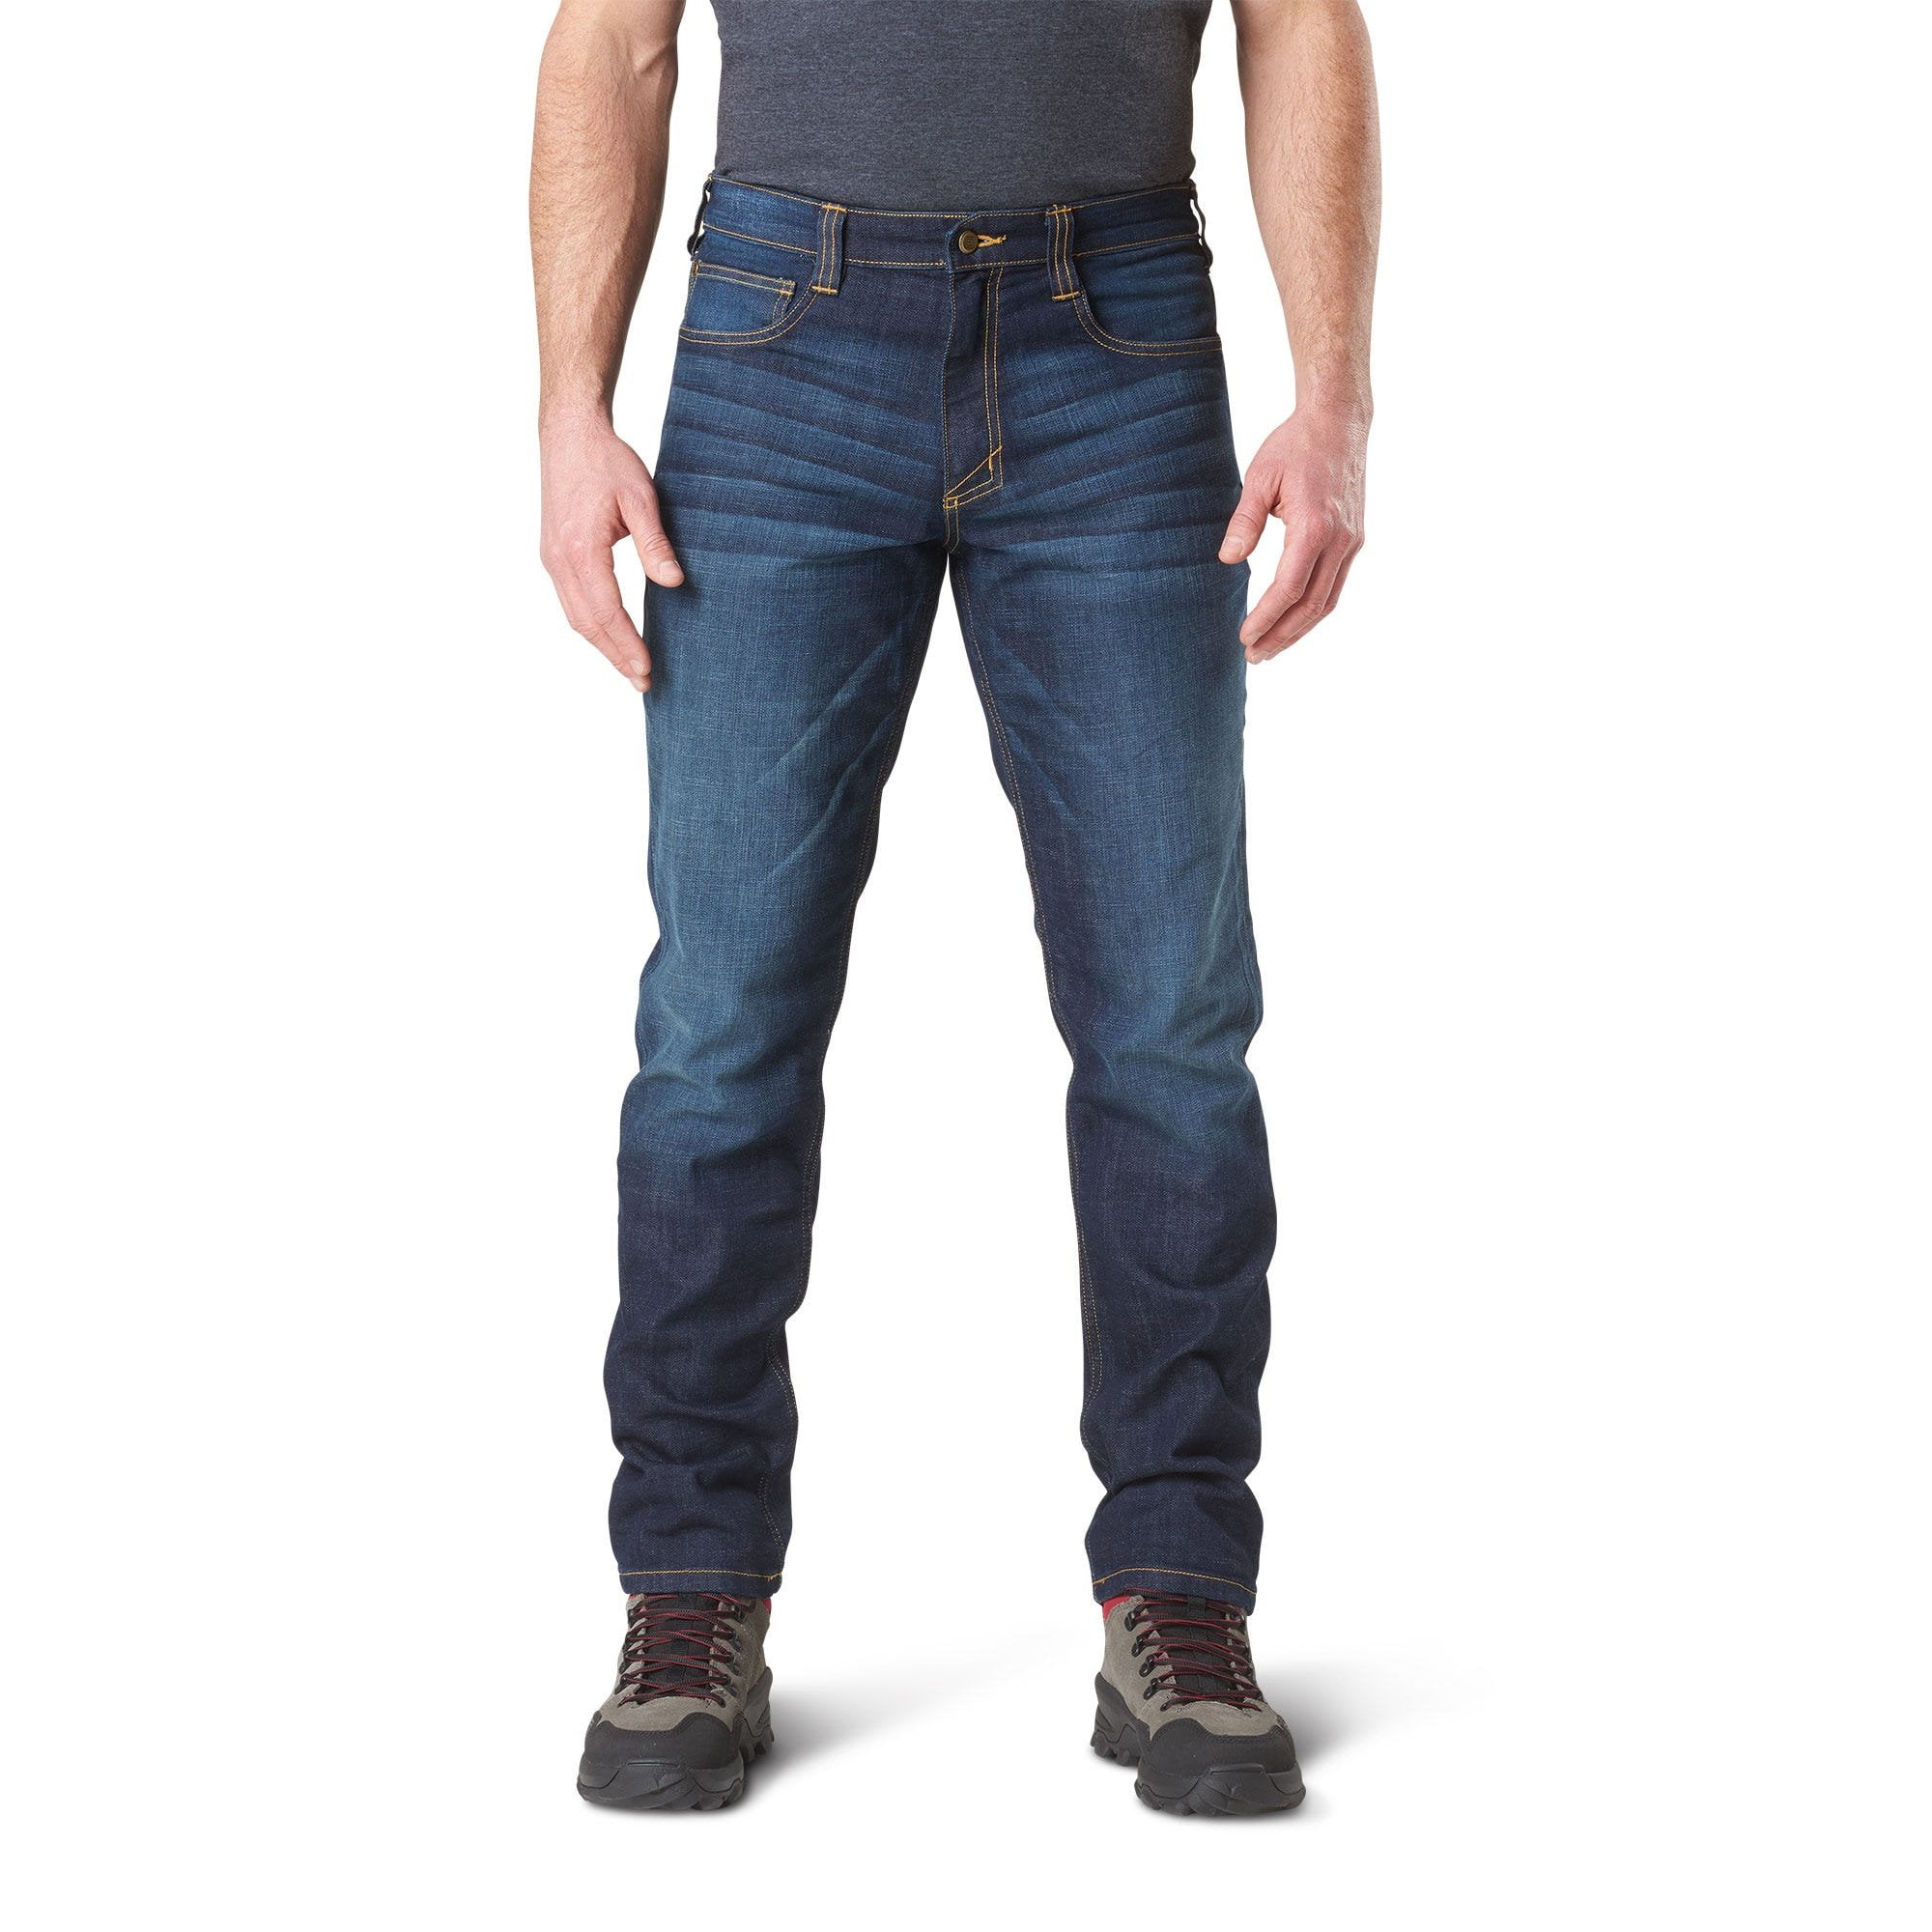 511 tactical jeans